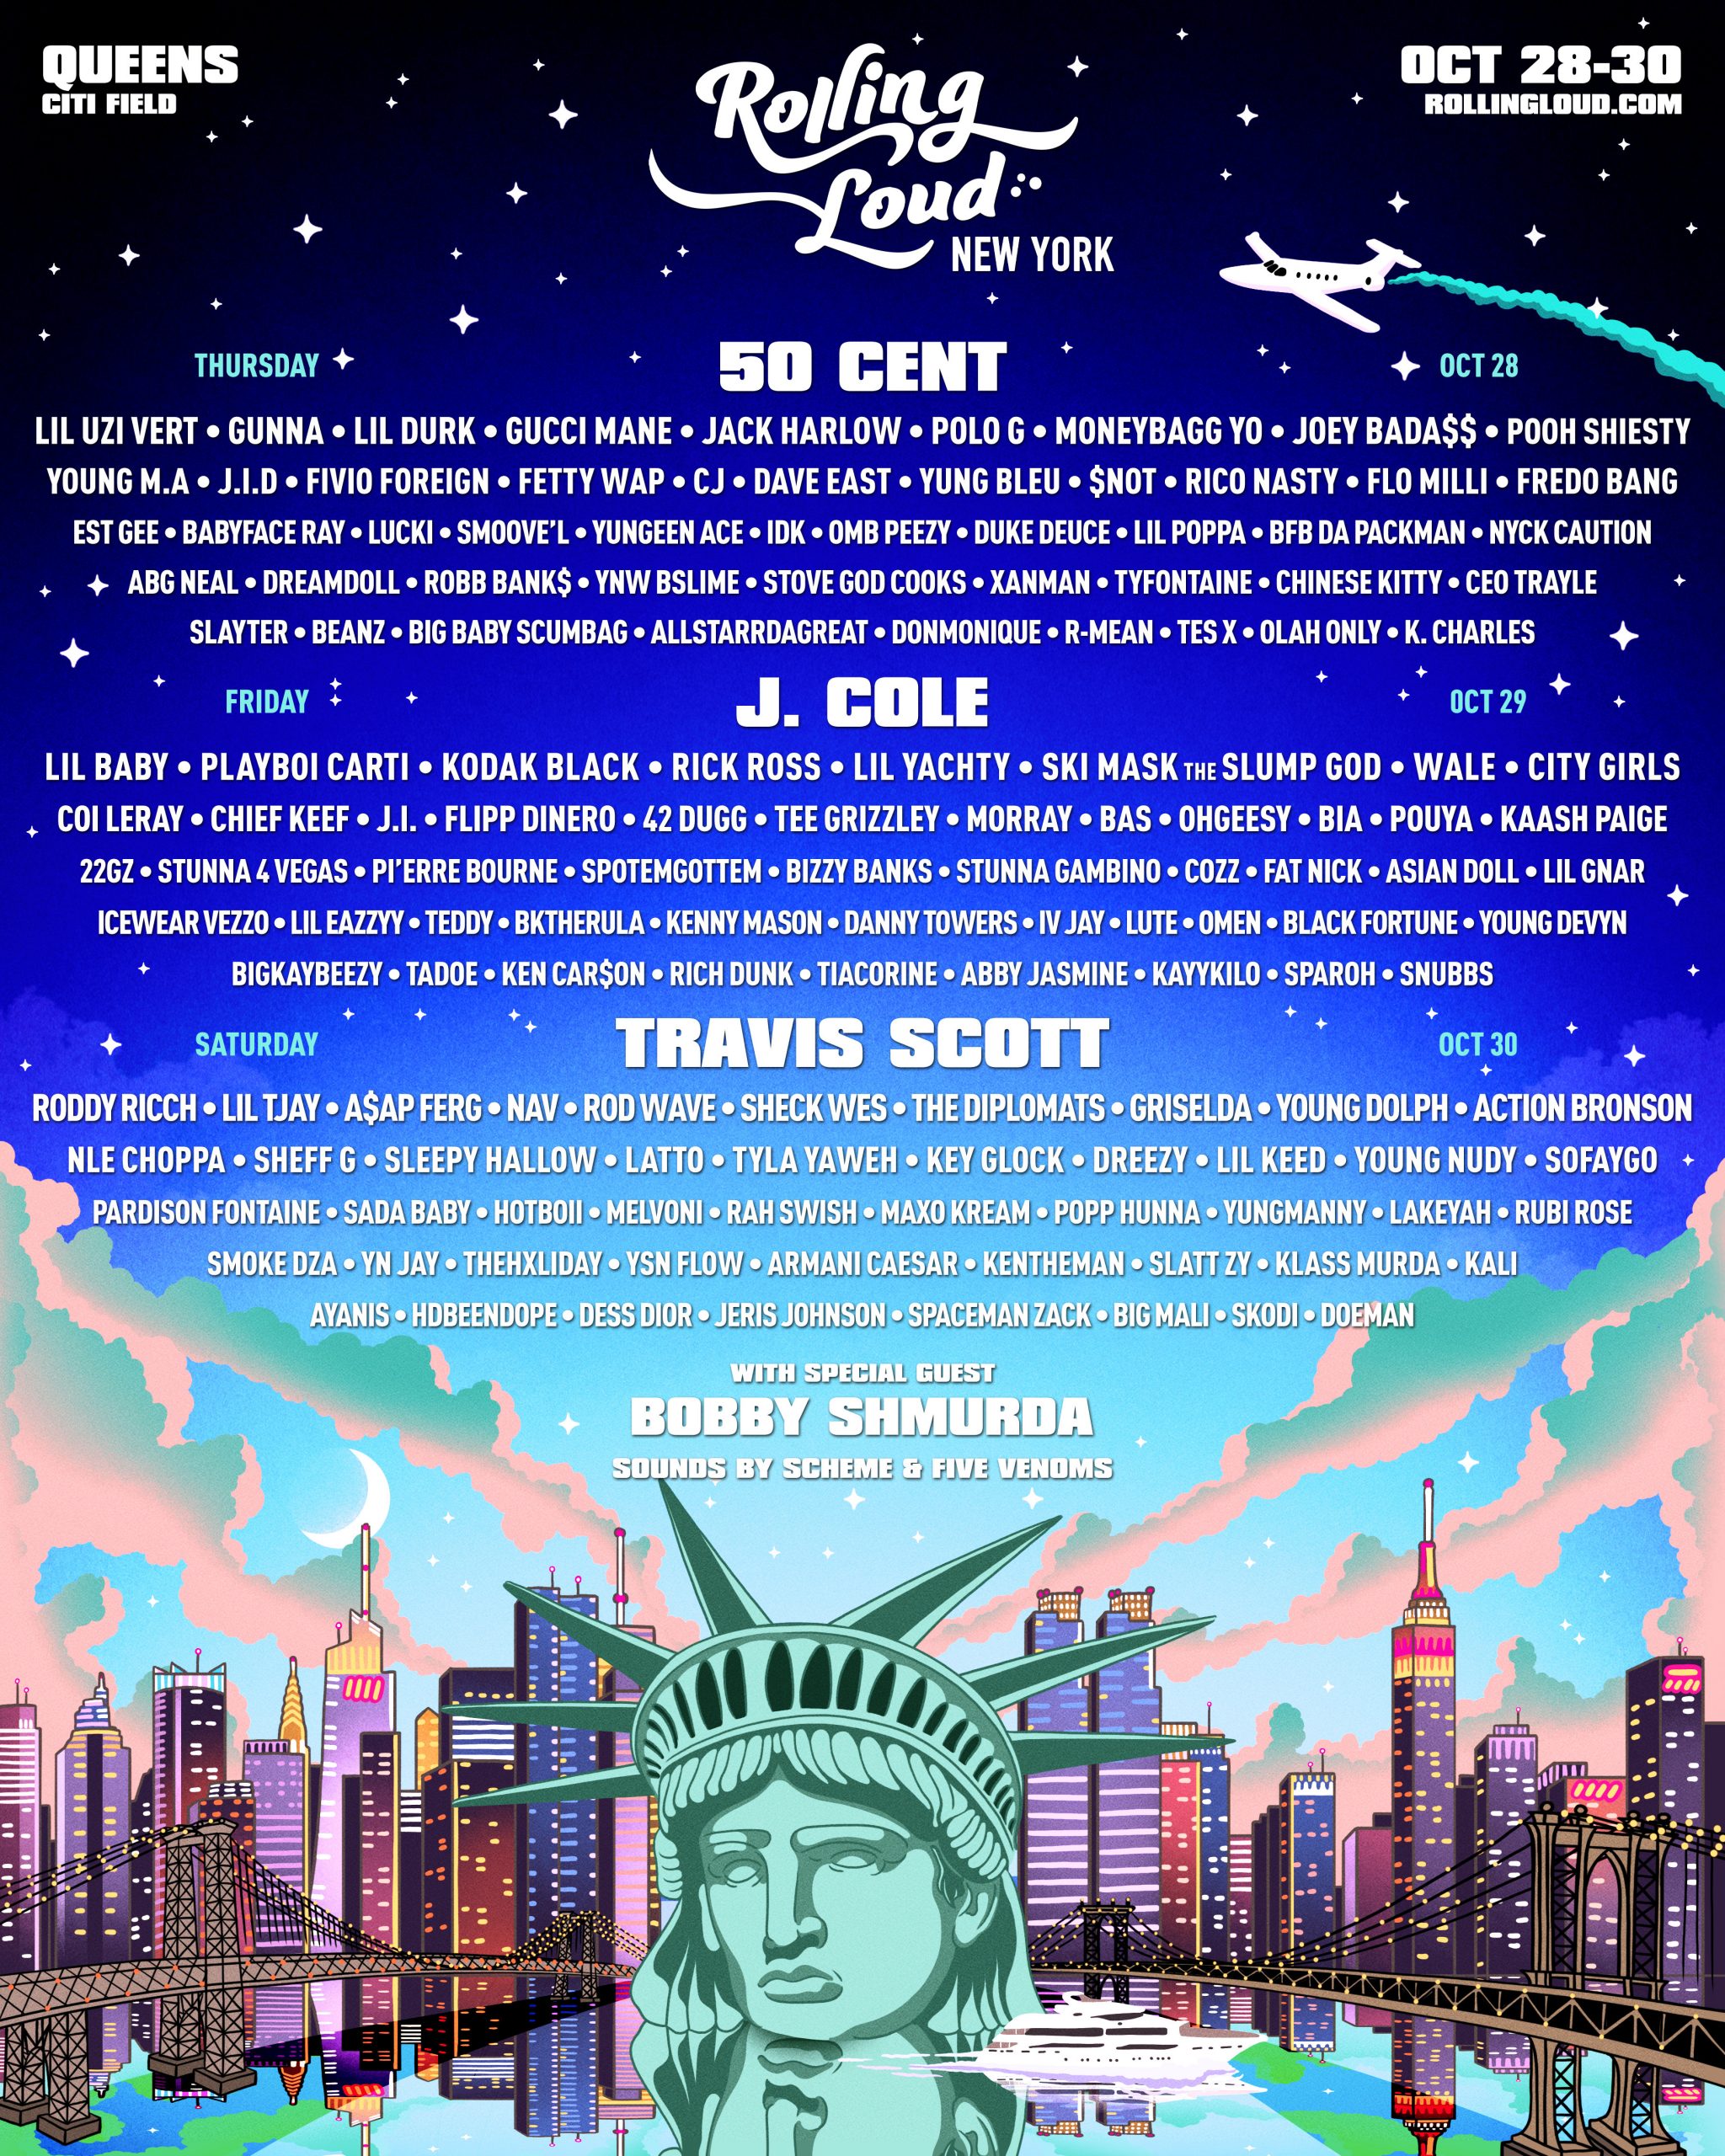 Rolling Loud Announces New York 2021 Festival, Returning to Queens in